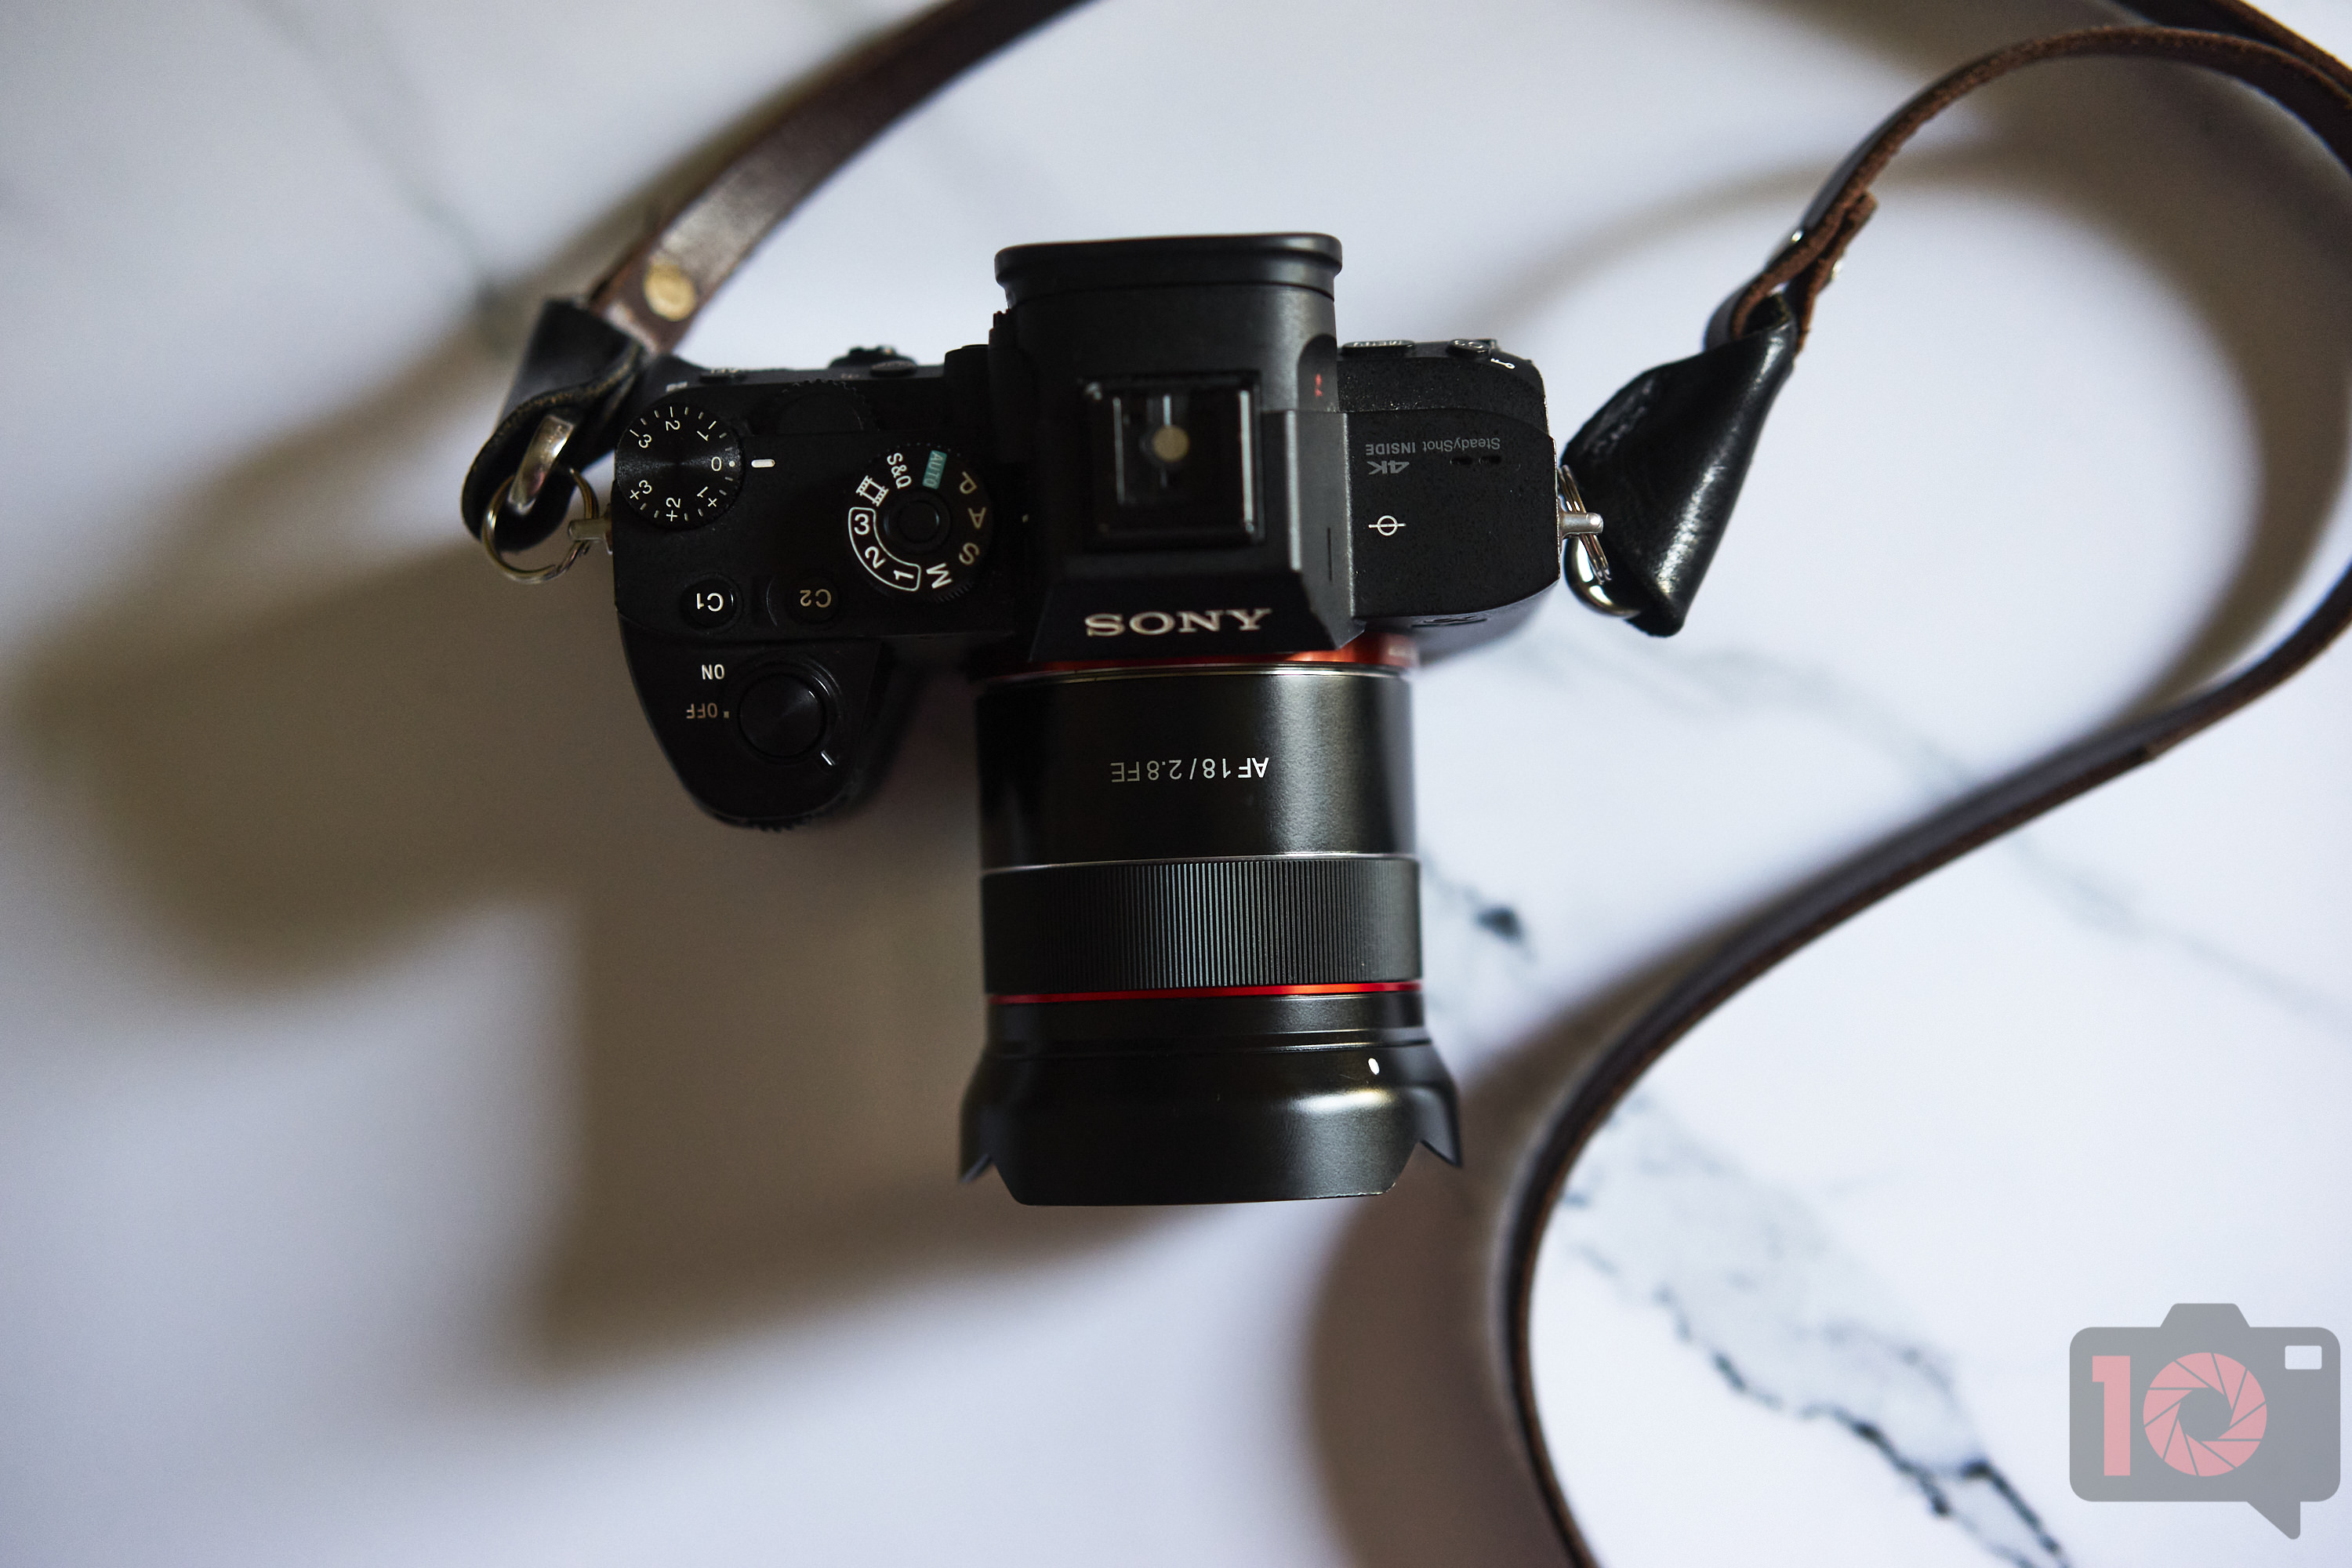 Chris Gampat The Phoblographer Samyang 18mm f2.8 Review product photos 2.21-160s1600 4